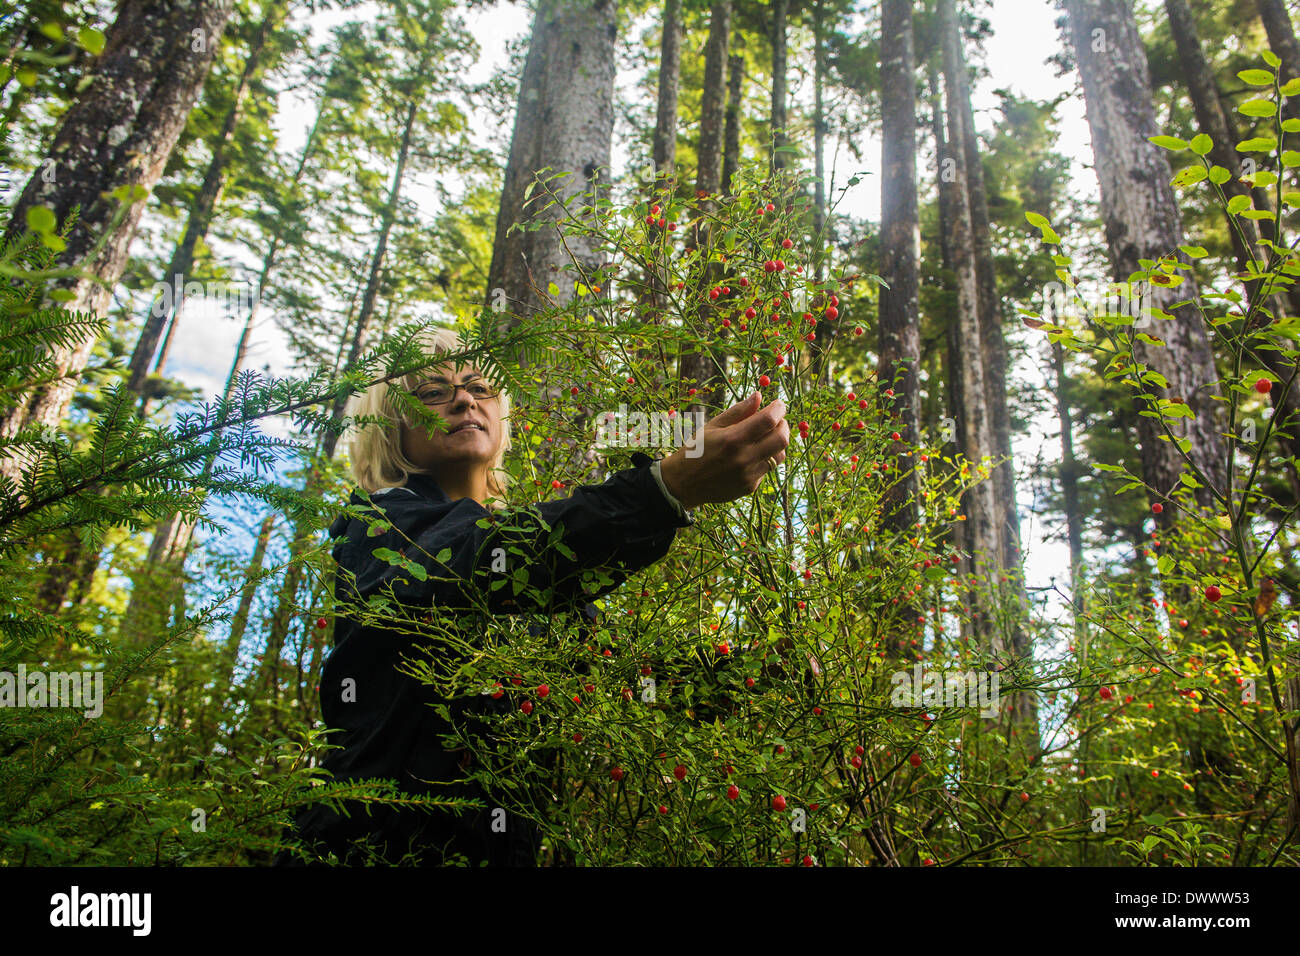 Woman picking wild huckleberries in the forest, Sitka, Alaska Stock Photo